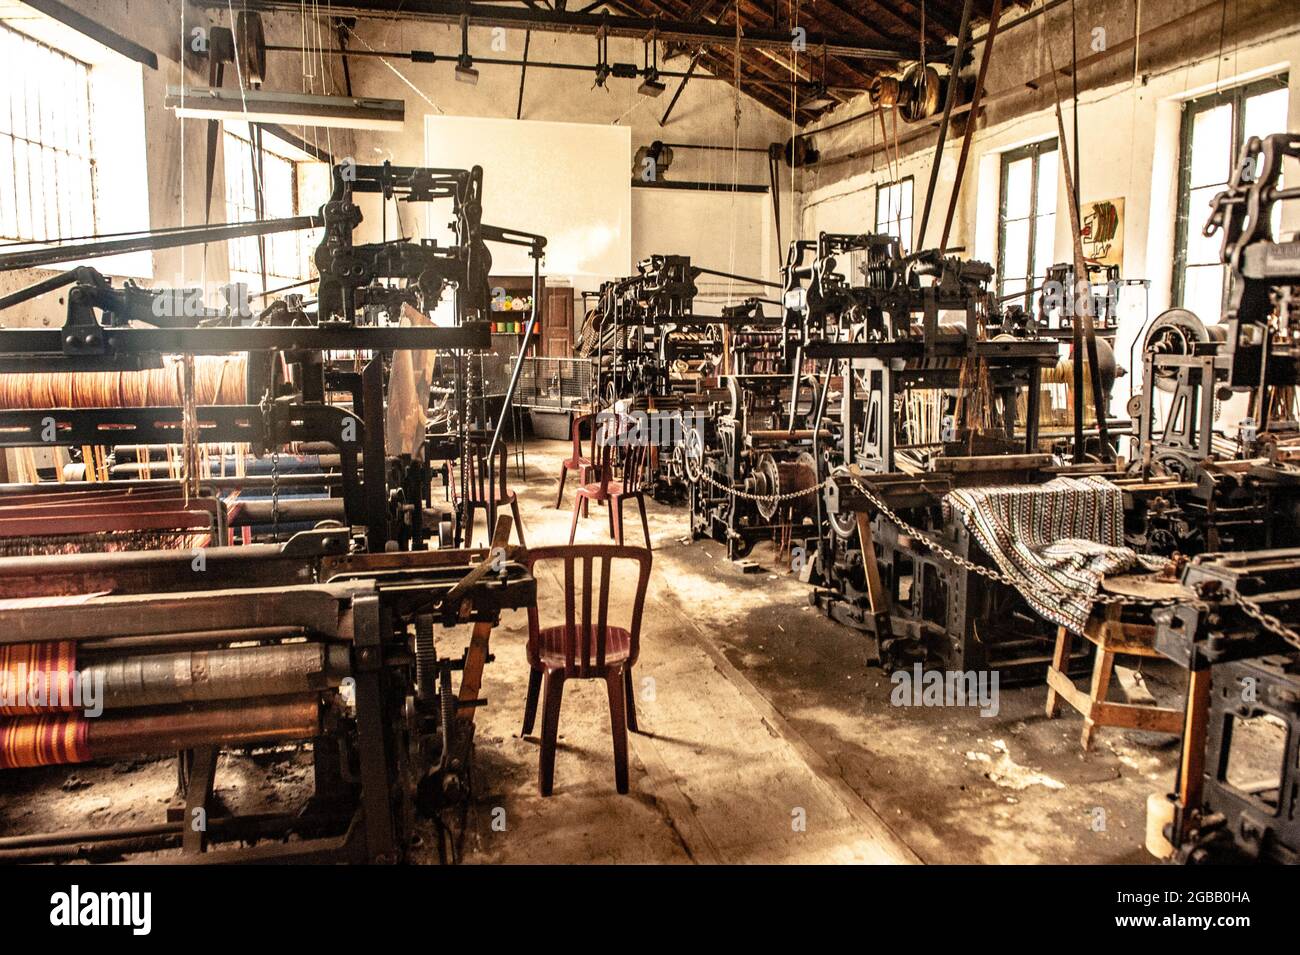 The former textile works of Arles-sur-Tech today house artist studios next to the historic machine hall, Le Moulin, Pyrénées-Orientales, France Stock Photo